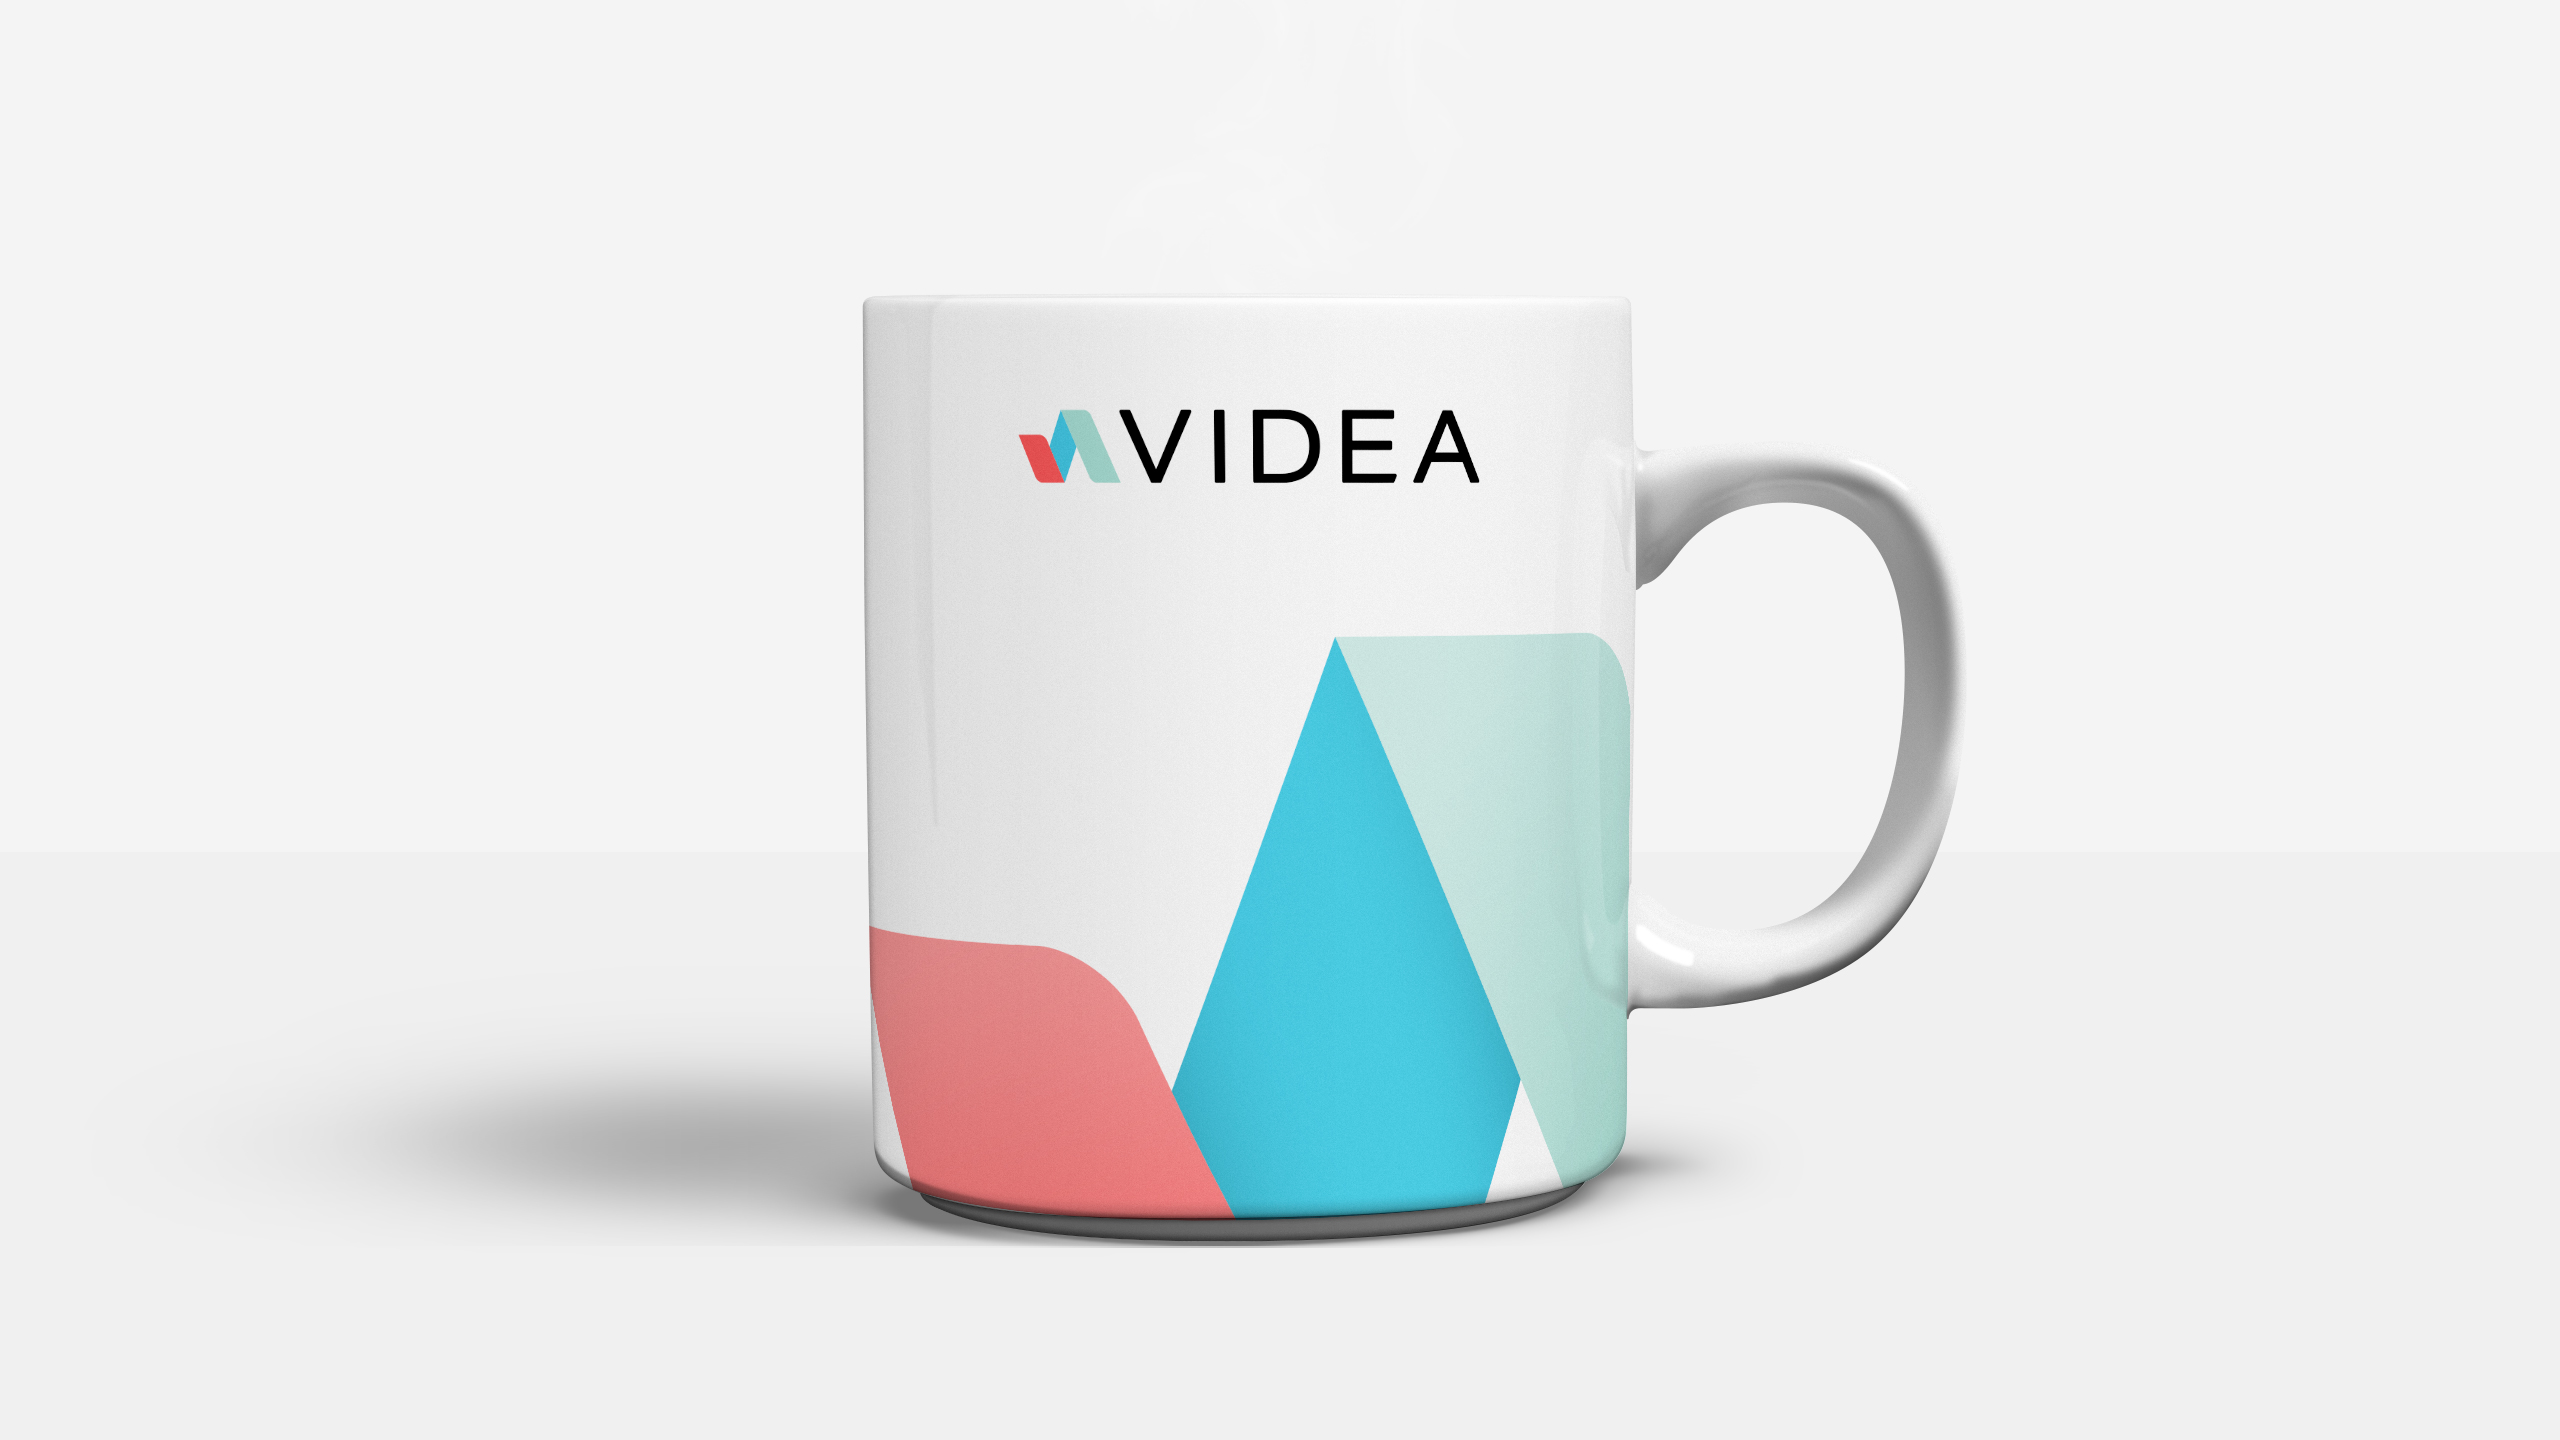 Mug design for Videa by The Coopers